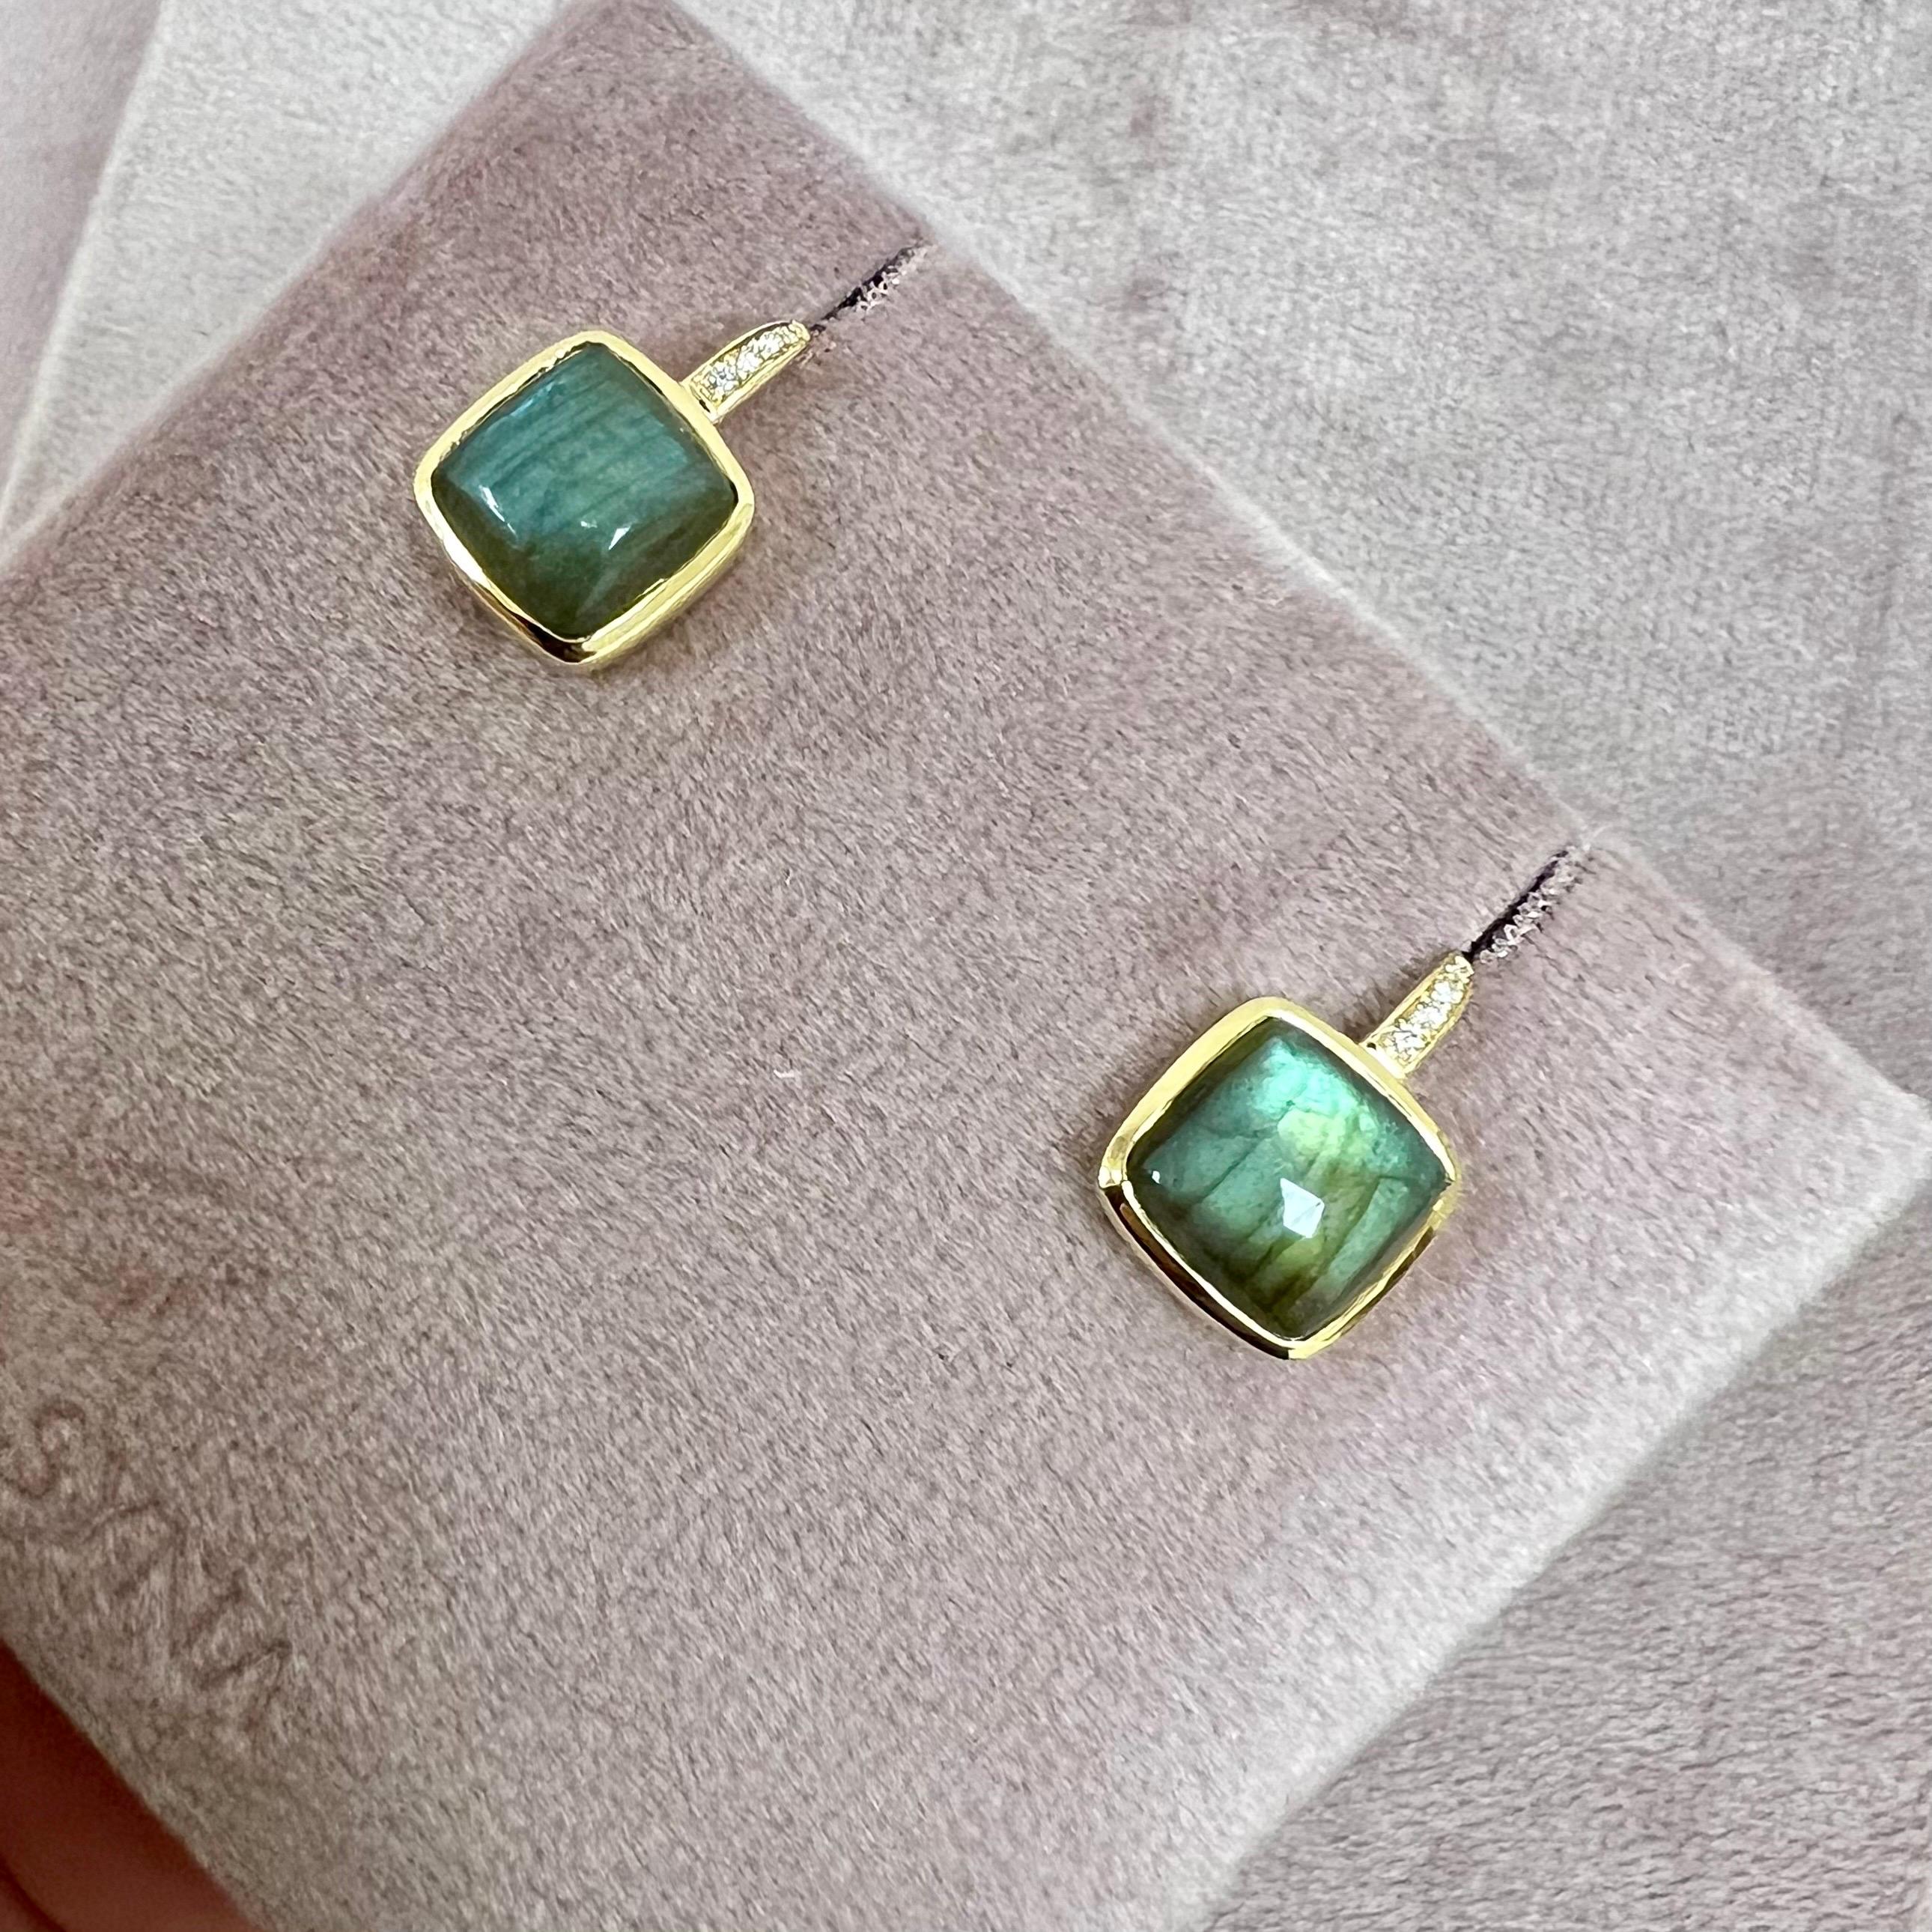 Created in 18 karat yellow gold
Labradorite 8 carats approx.
Diamonds 0.05 carat approx.
French wire for pierced ears
Limited edition

Composed in 18 karat golden hue, these limited edition earrings comprise 8 carats of labradorite and around 0.05